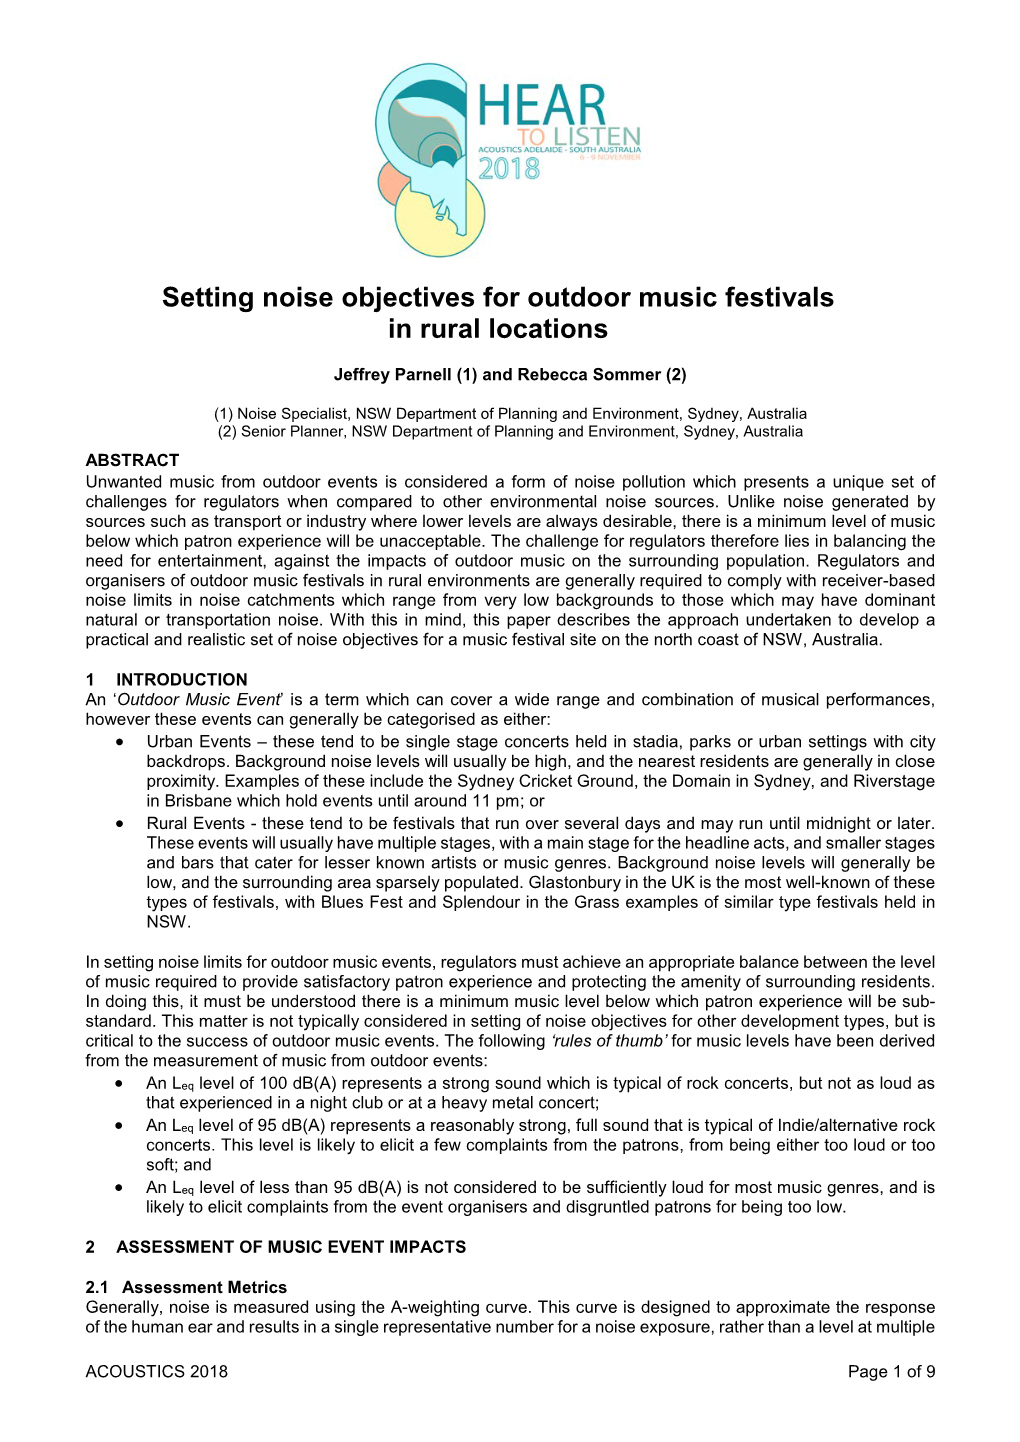 Setting Noise Objectives for Outdoor Music Festivals in Rural Locations